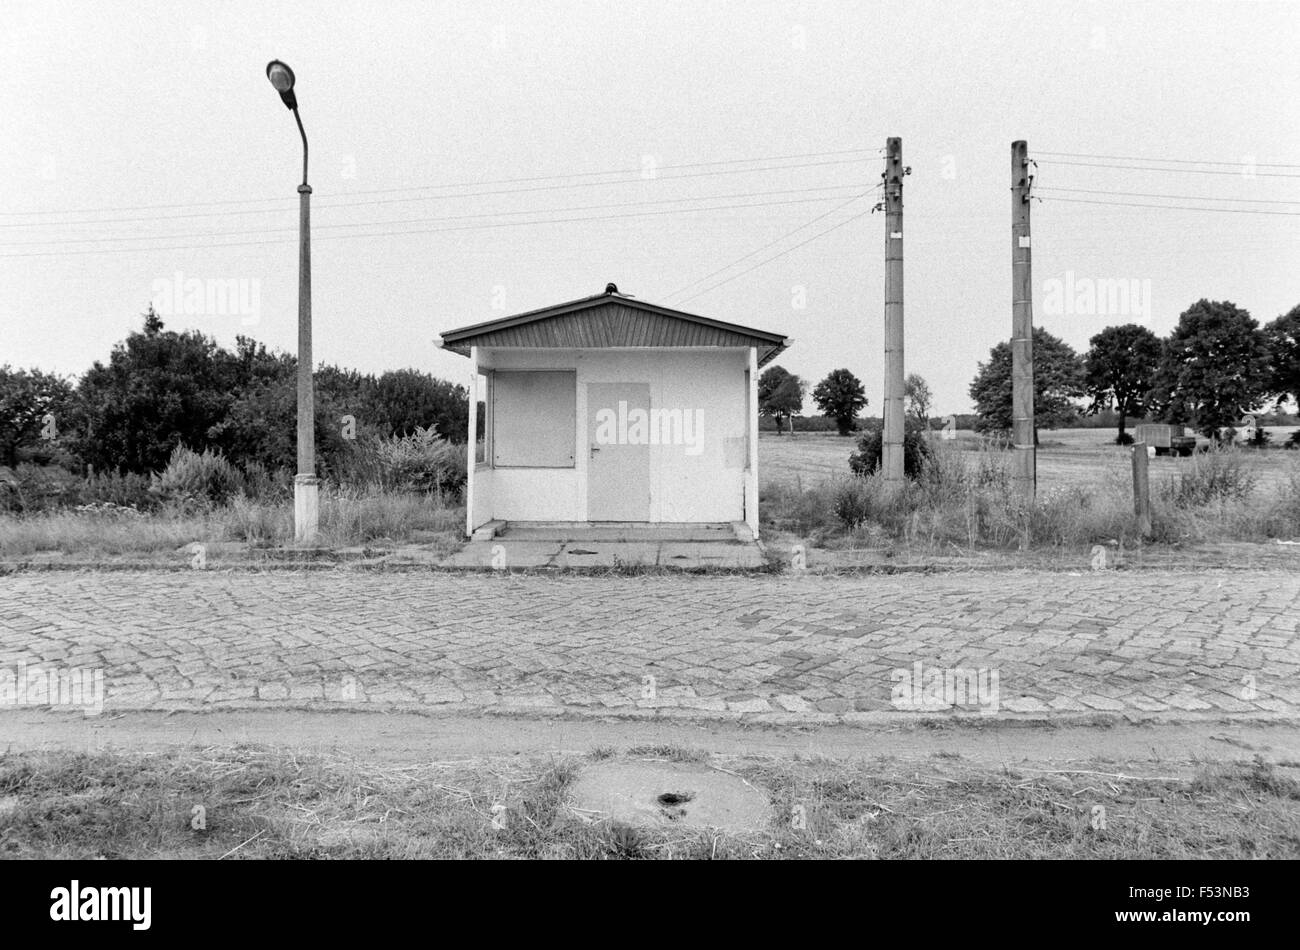 14.08.1990, Zarrentin, Schwerin, German Democratic Republic - Small Wartehaeuschen roadside. 00P900814A013CAROEX.JPG - NOT for SALE in G E R M A N Y, A U S T R I A, S W I T Z E R L A N D [MODEL RELEASE: NOT APPLICABLE, PROPERTY RELEASE: NO (c) caro photo agency / Muhs, http://www.caro-images.pl, info@carofoto.pl - In case of using the picture for non-journalistic purposes, please contact the agency - the picture is subject to royalty!] Stock Photo